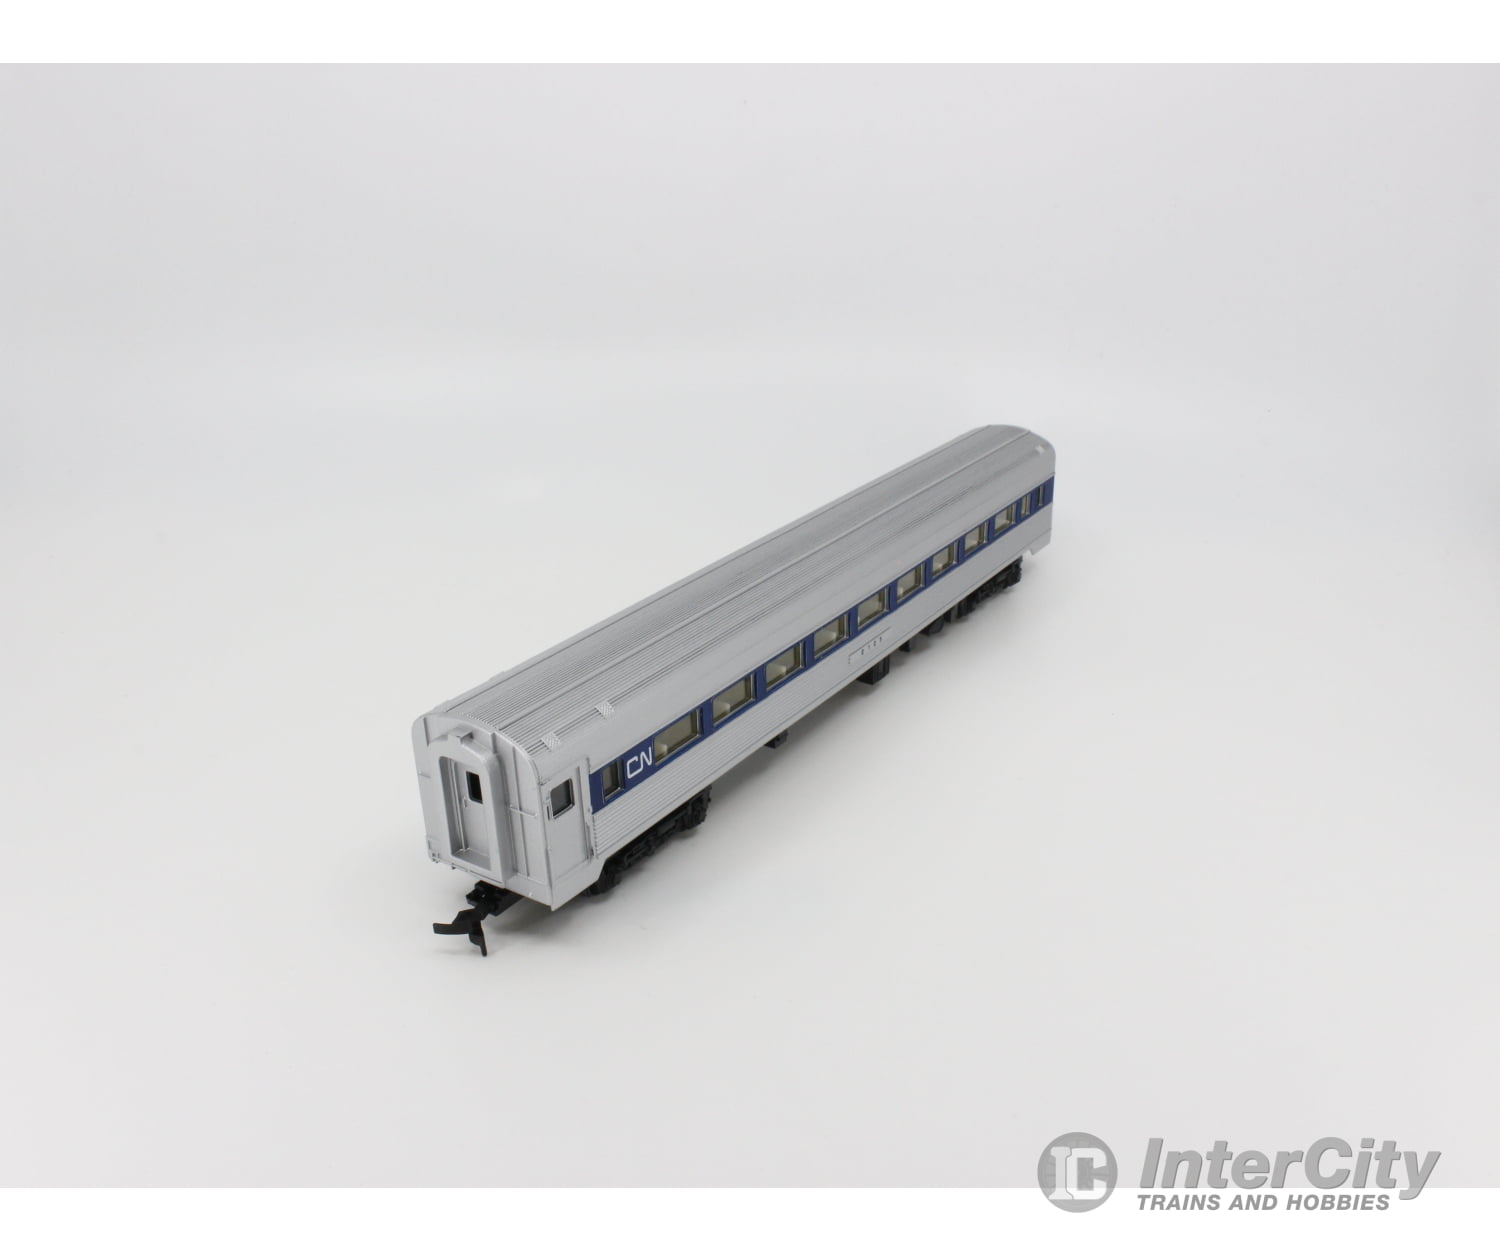 Model Power 8840 Ho Coach Passenger Car W/Interior And Metal Wheels Canadian National (Cn) 2125 Cars